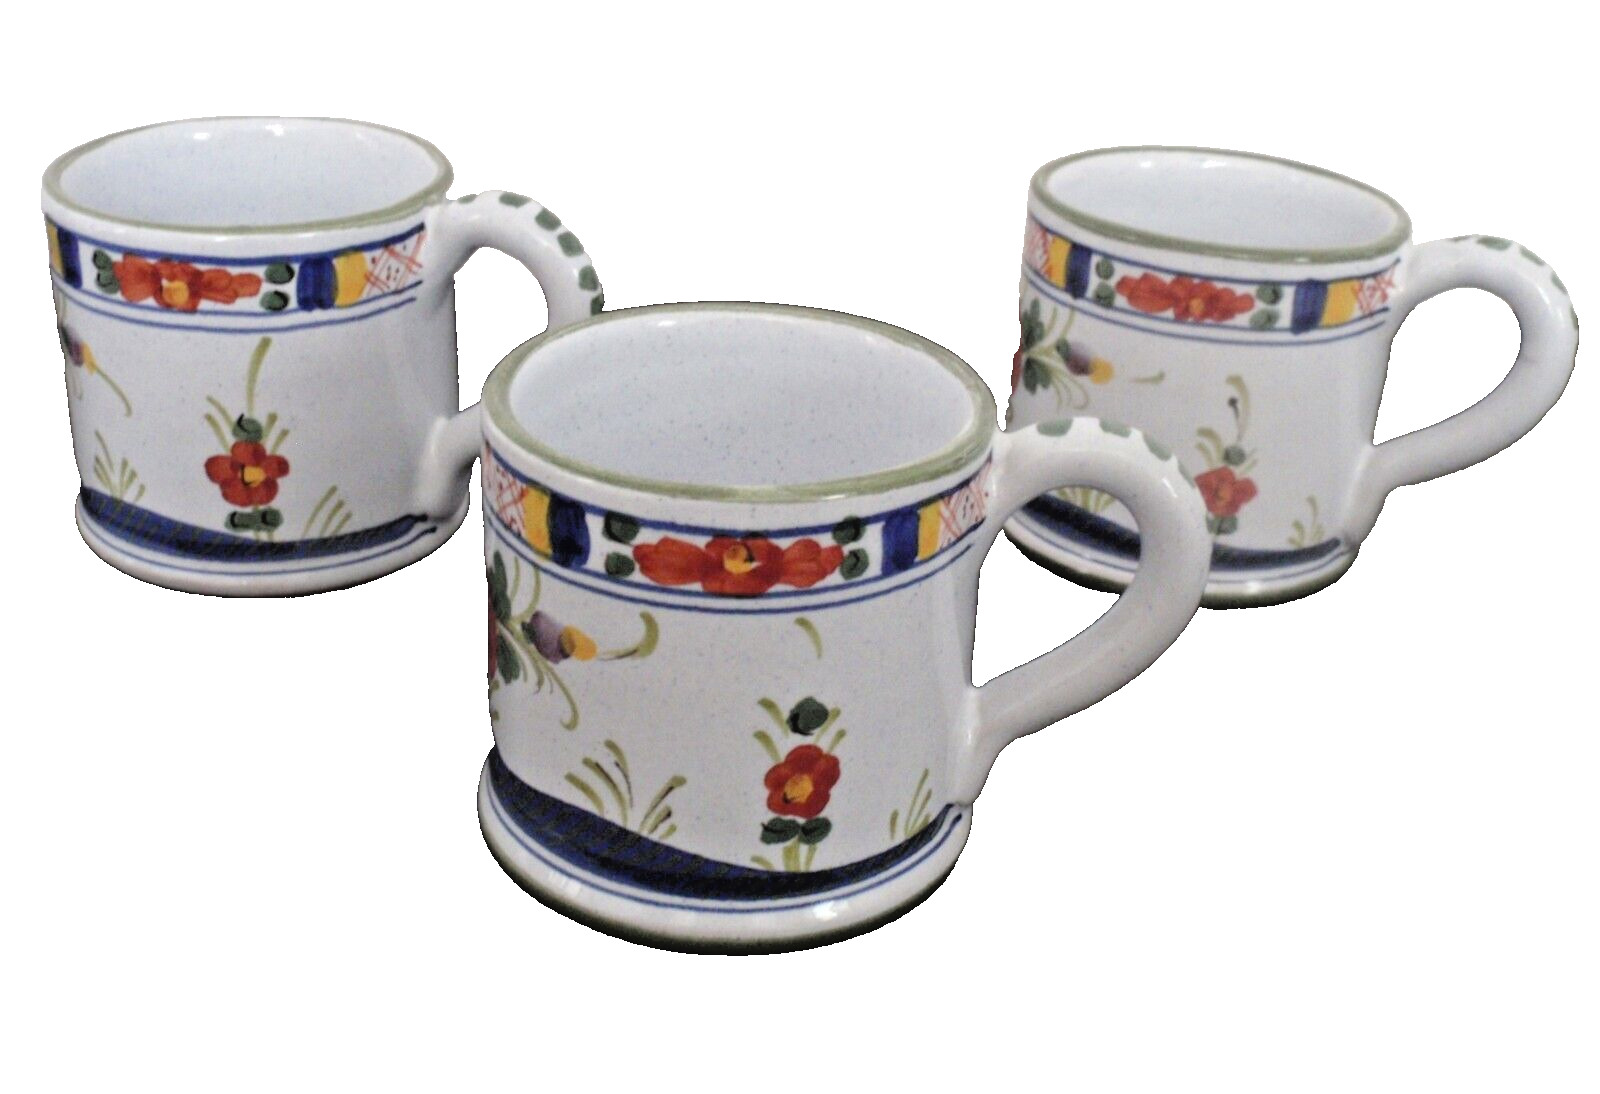 Delft Polychromatic Demitasse Cups Set of 3 Purchased in Amsterdam 1980\'s